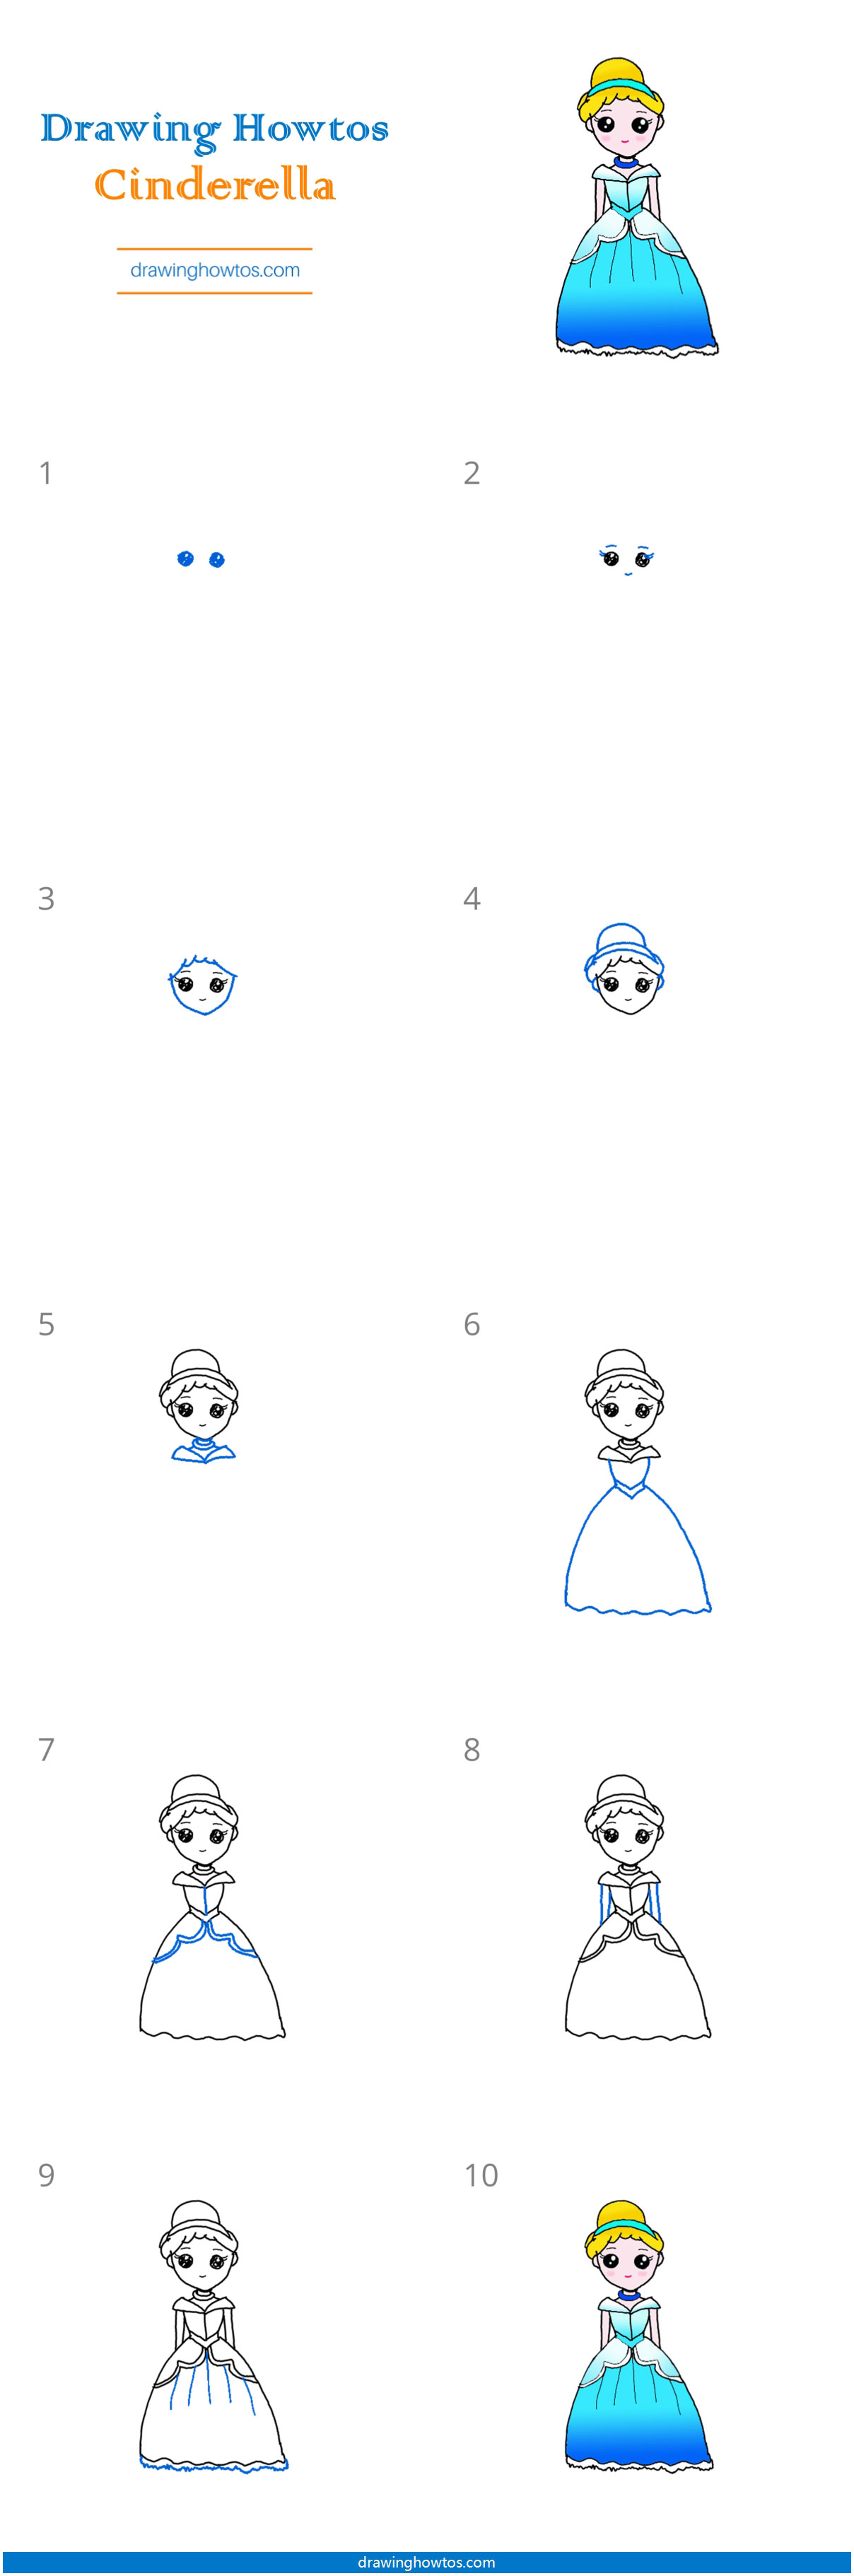 How to Draw Cinderella Step by Step